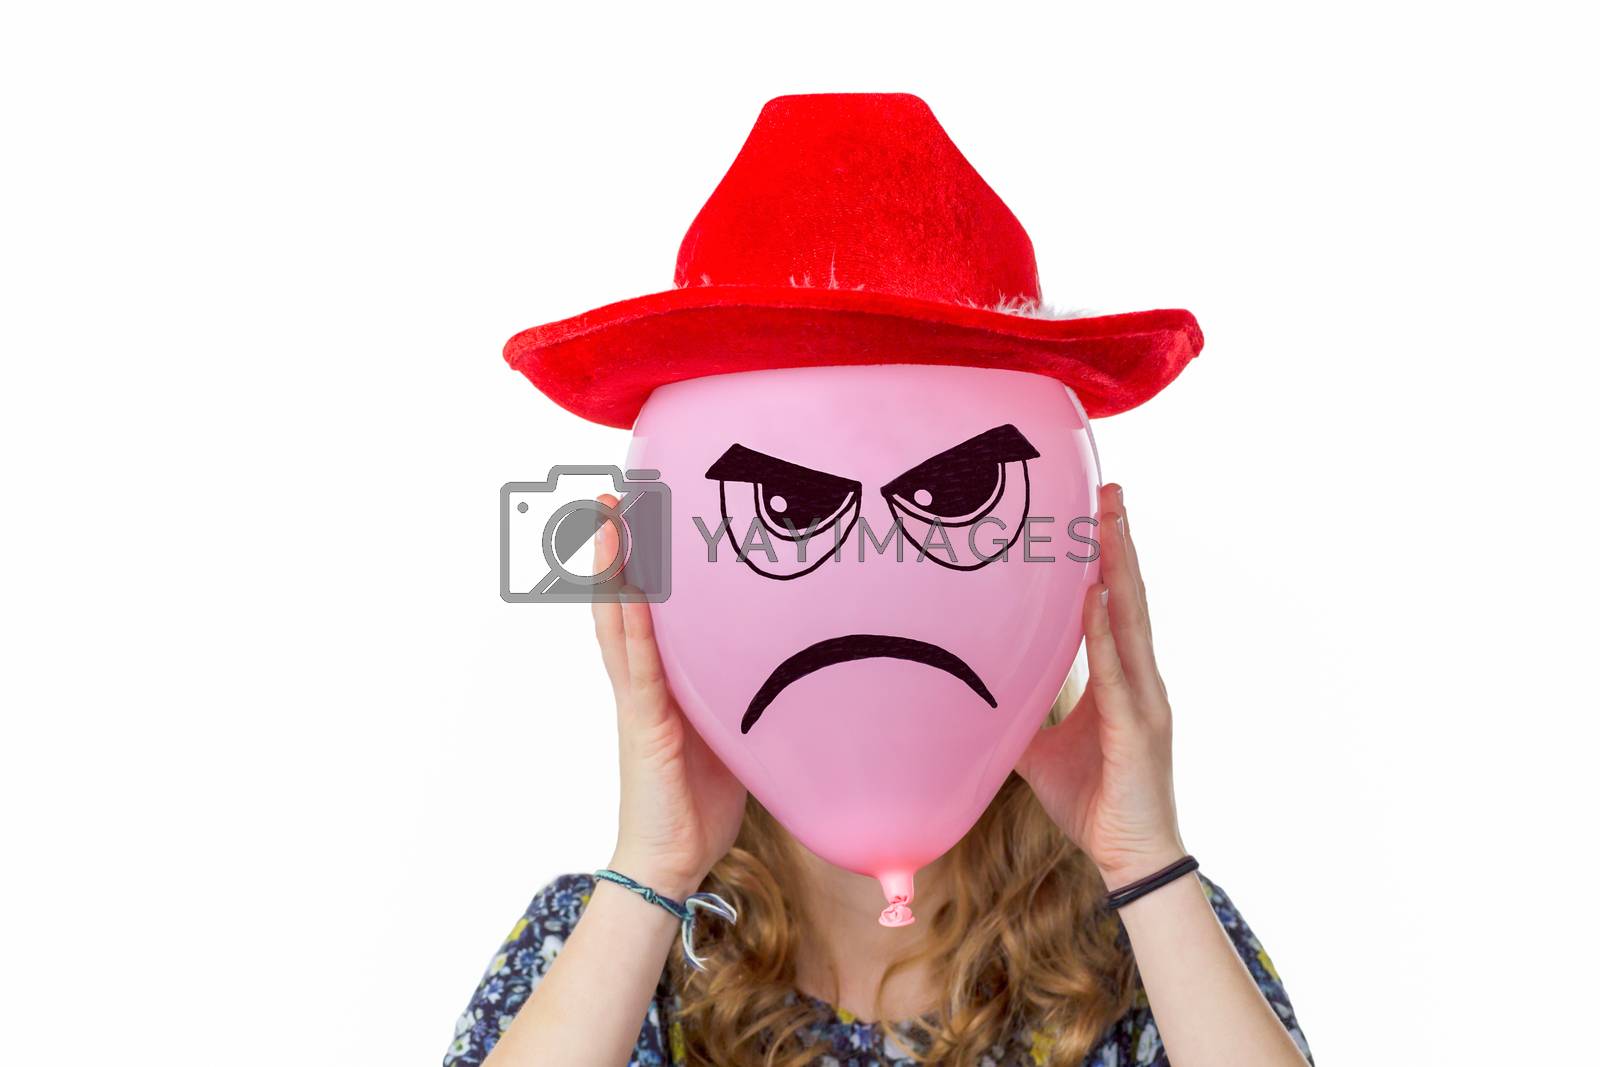 Royalty free image of Girl holding pink balloon with angry face and red hat by BenSchonewille